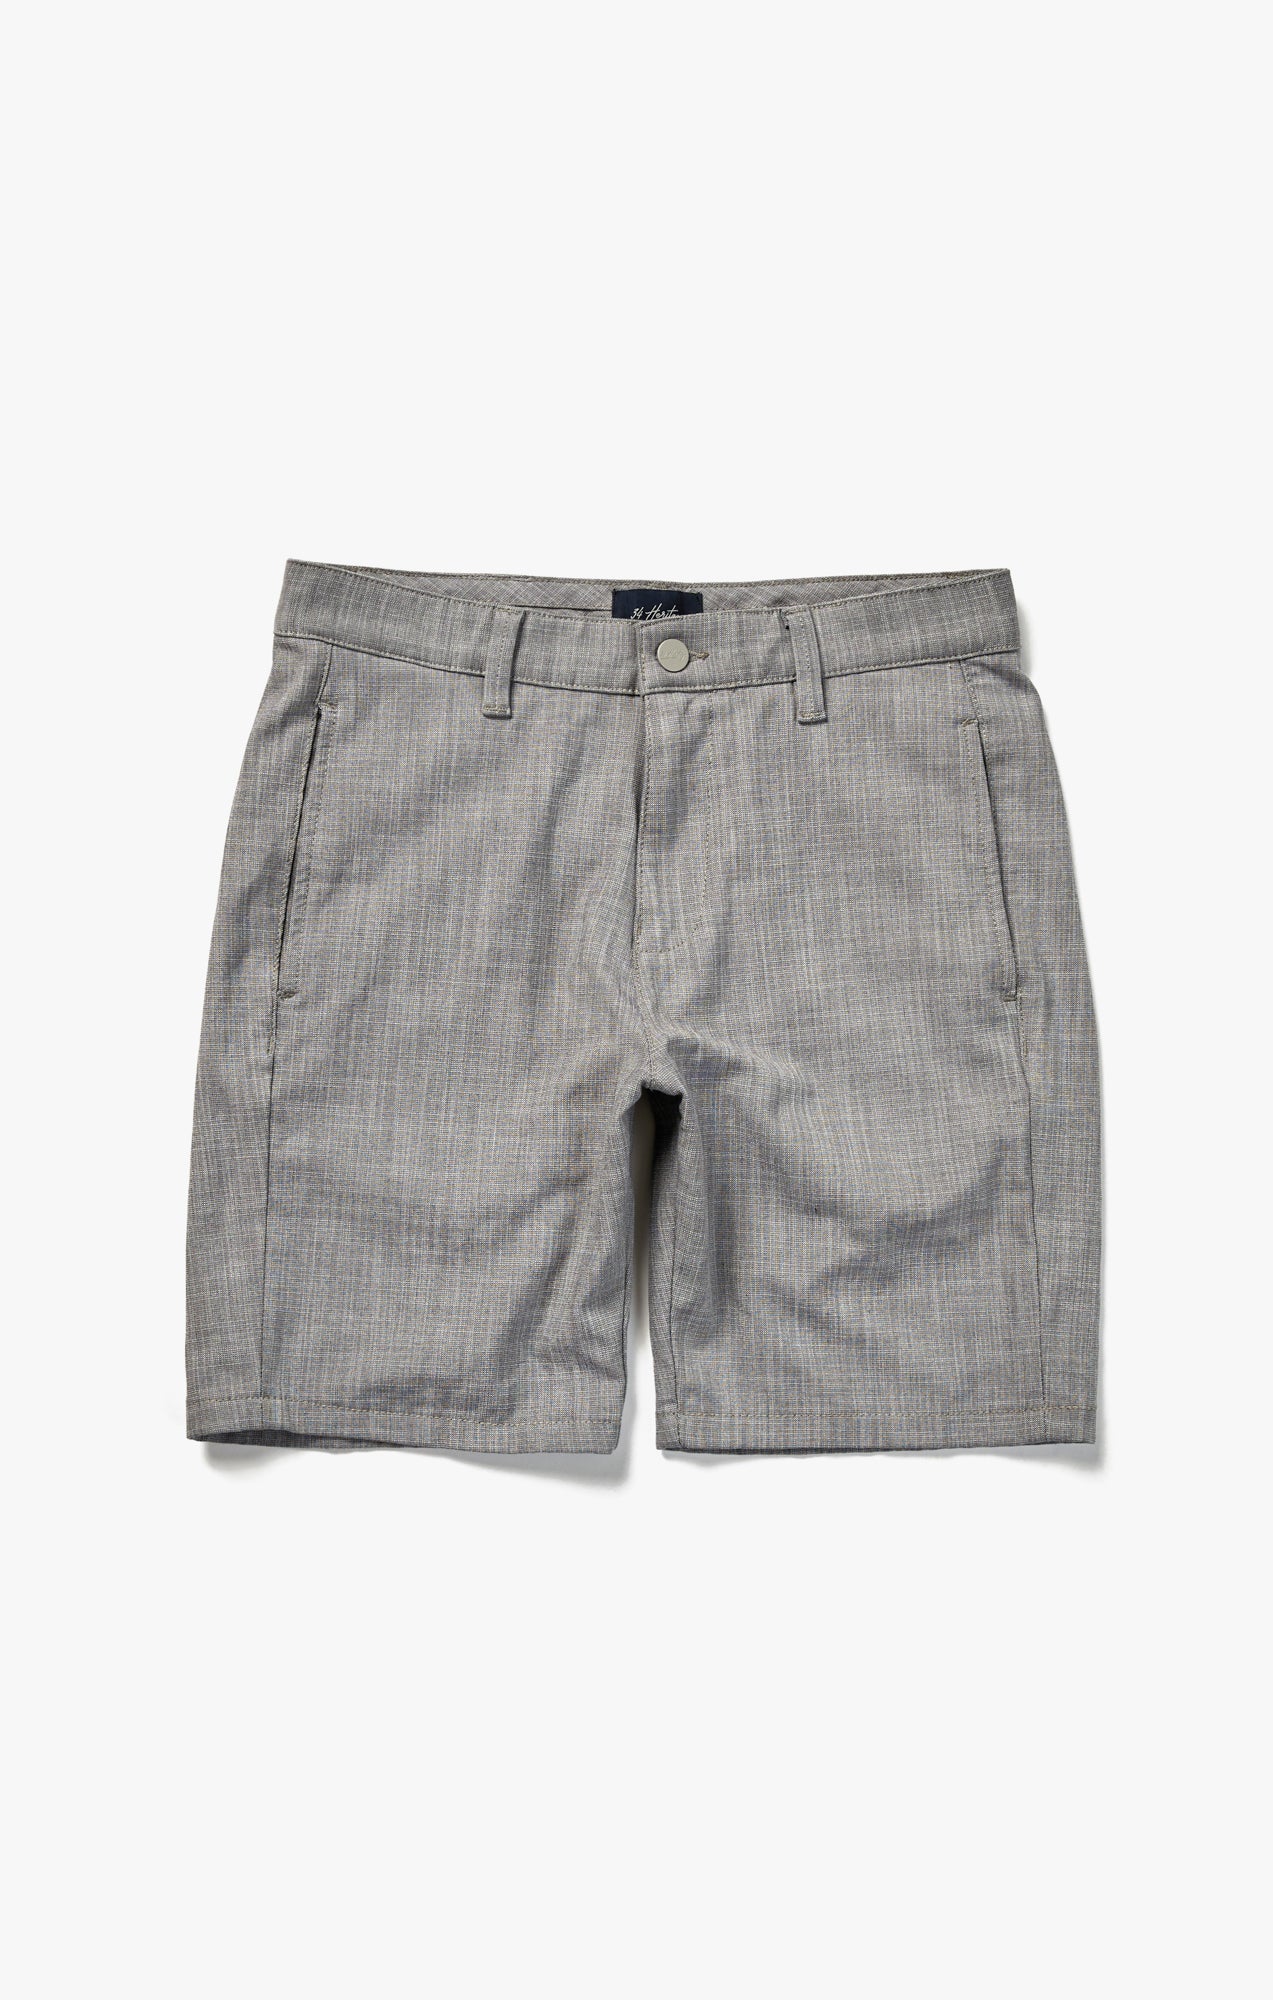 Nevada Shorts In Magnet Cross Twill – 34 Heritage